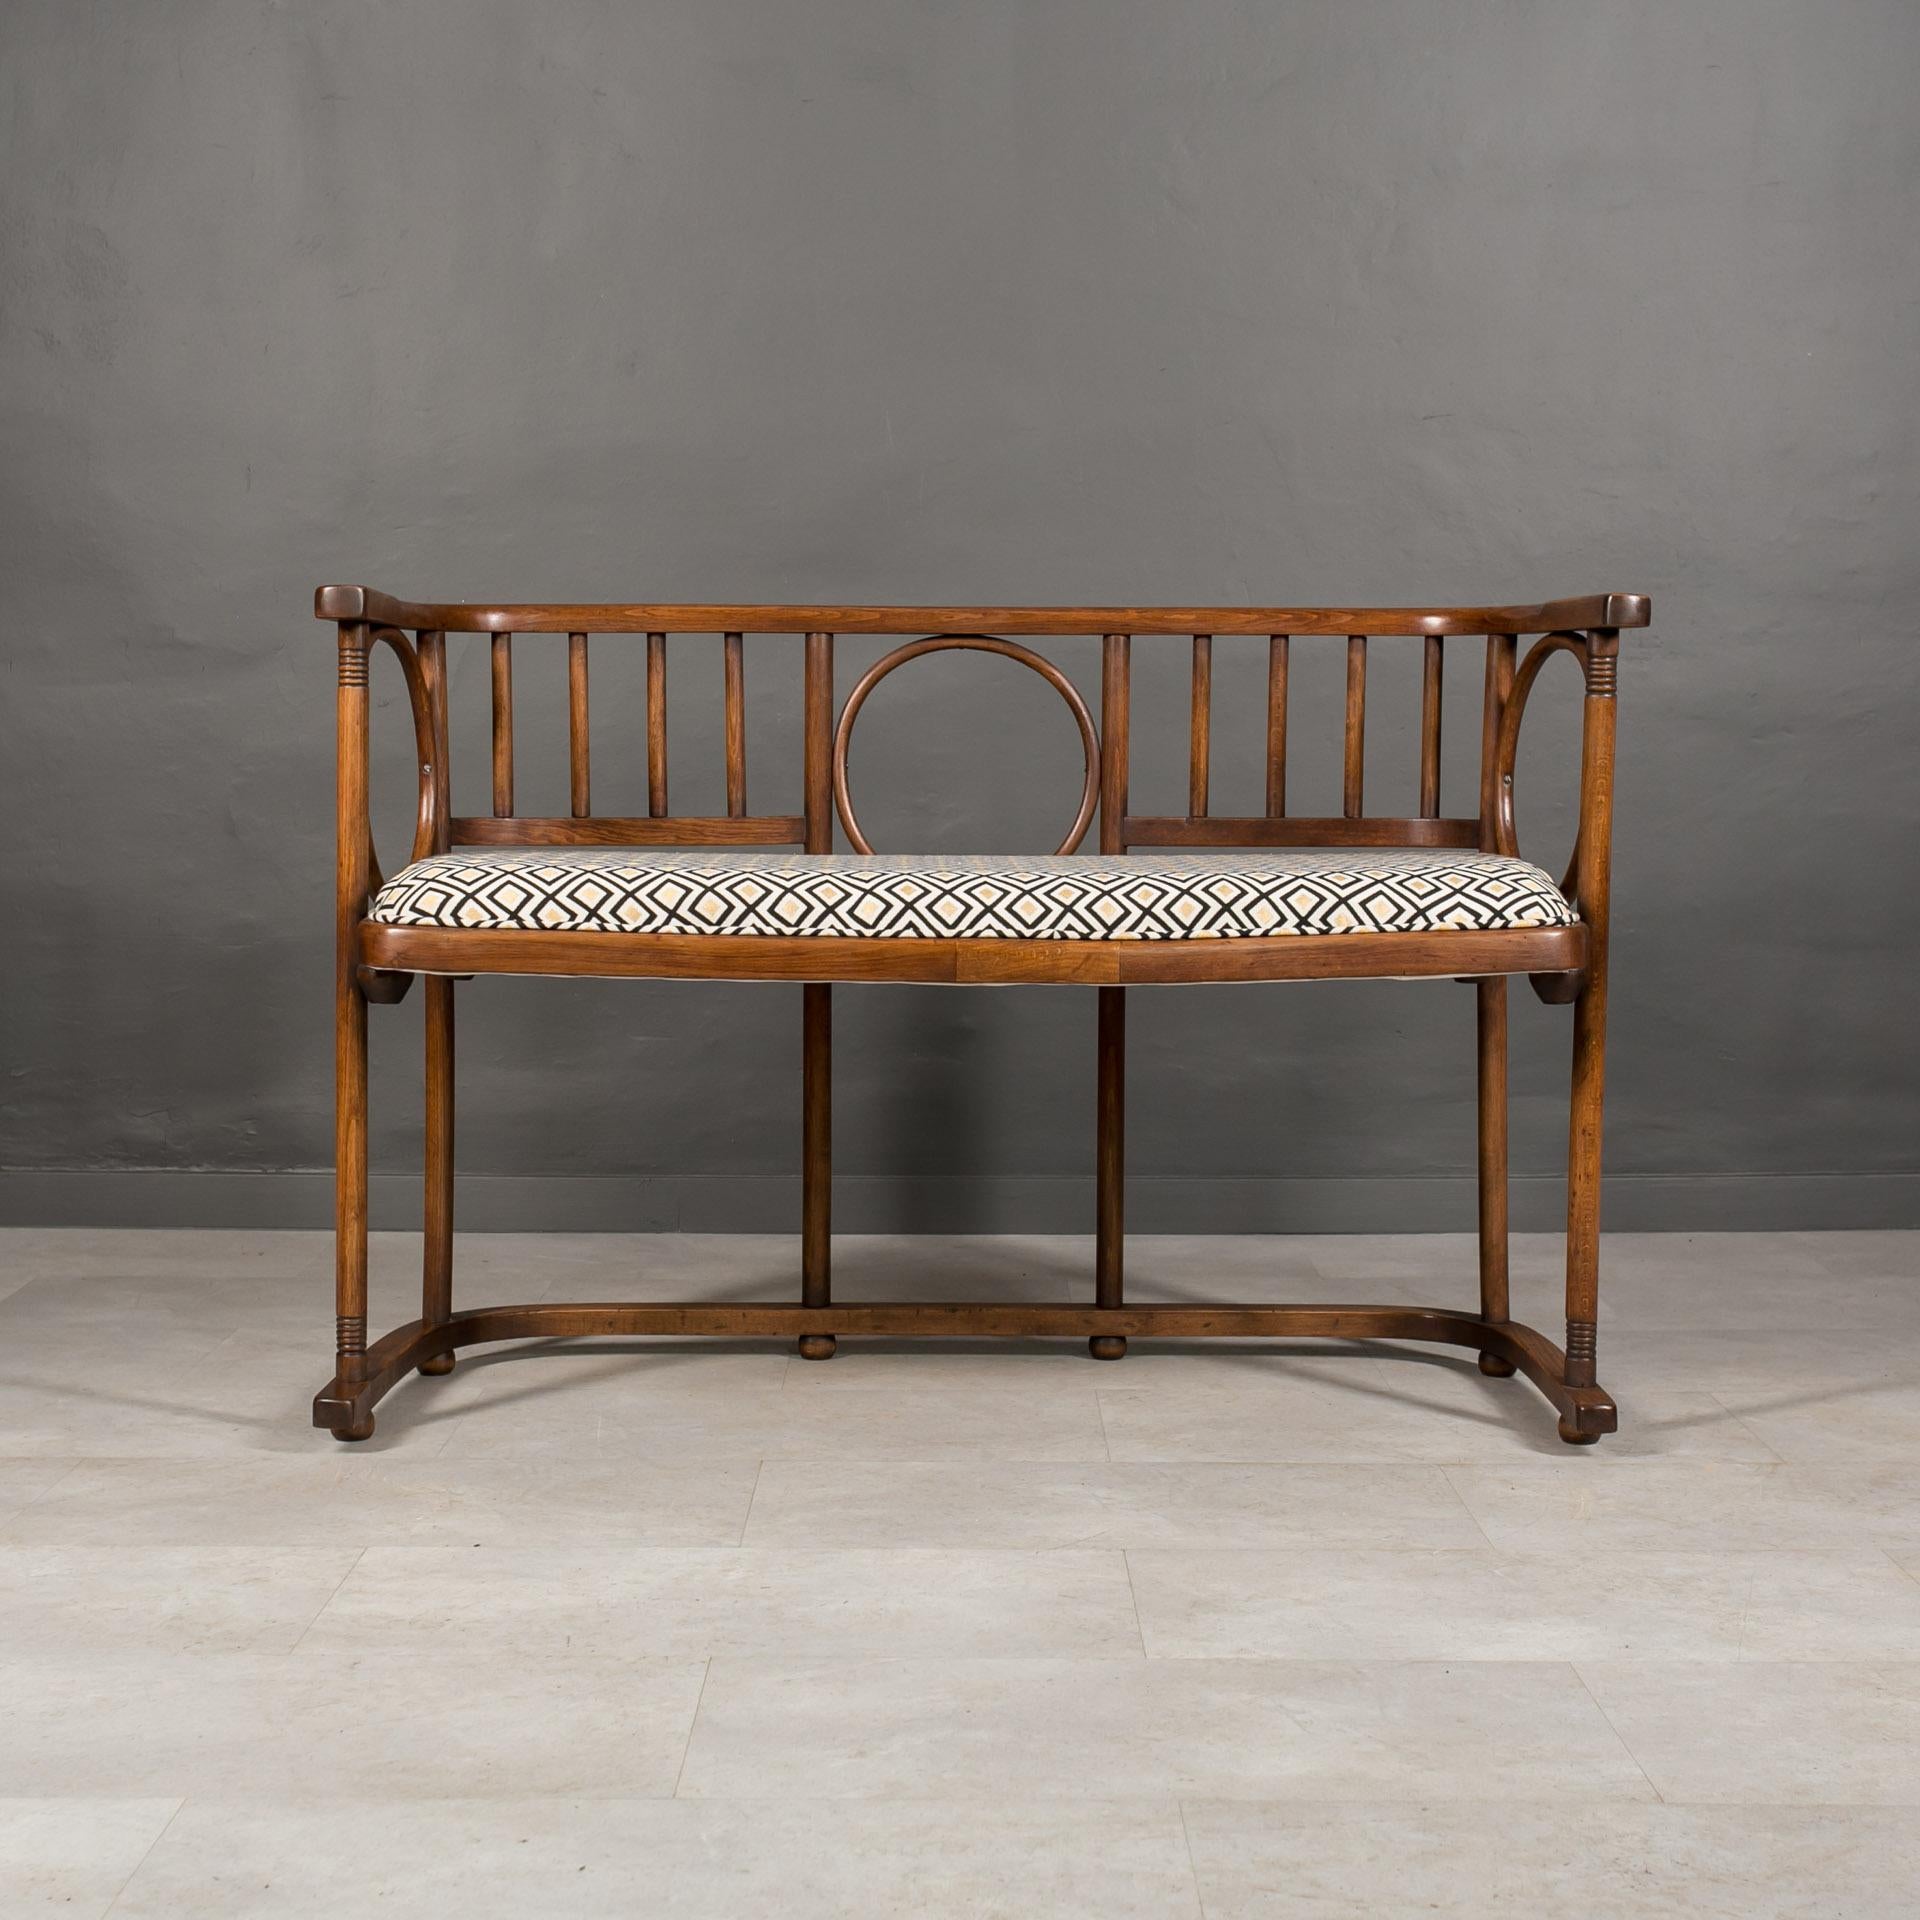 Vienna Secession Early 20th Century Bentwood Bench Settee by J. Hoffmann for Thonet - Mundus